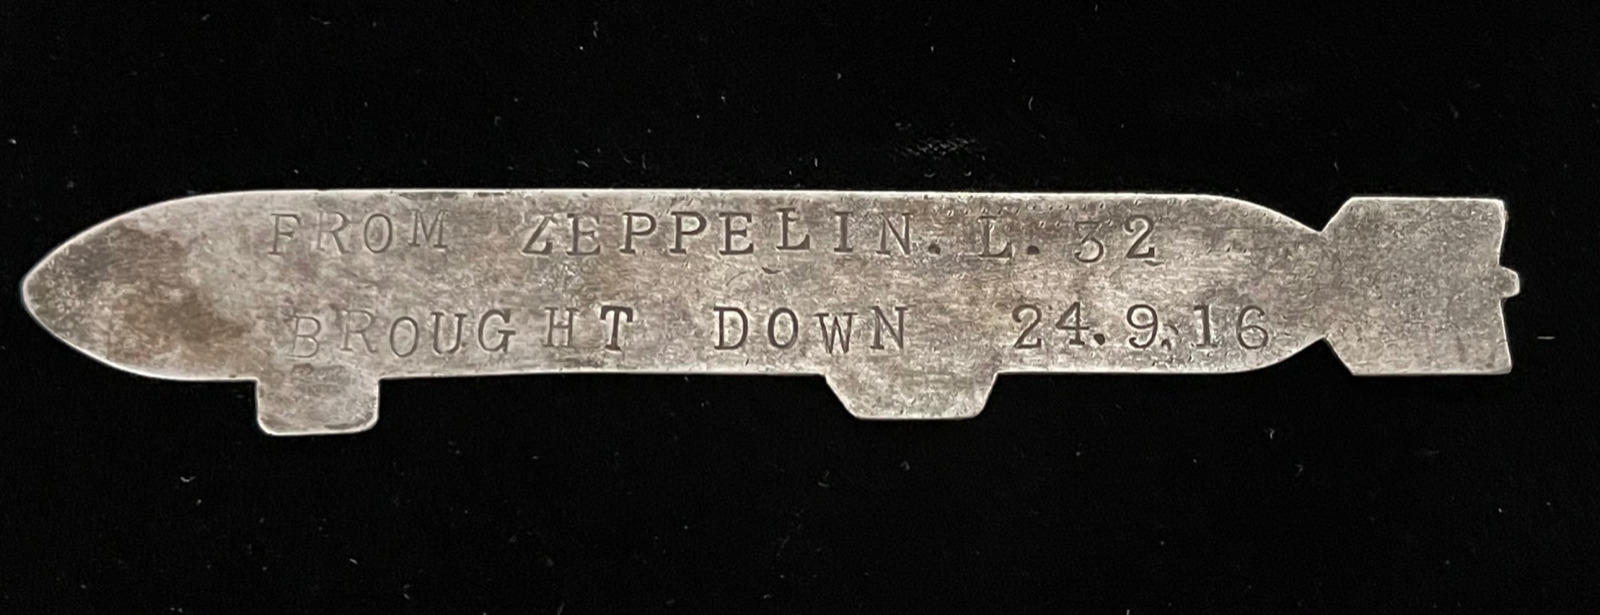 L.32 ZEPPELIN DOWNED OVER DURALUMIN 1916 DATED STAMPED TRENCH ART AIRSHIP DESIGN